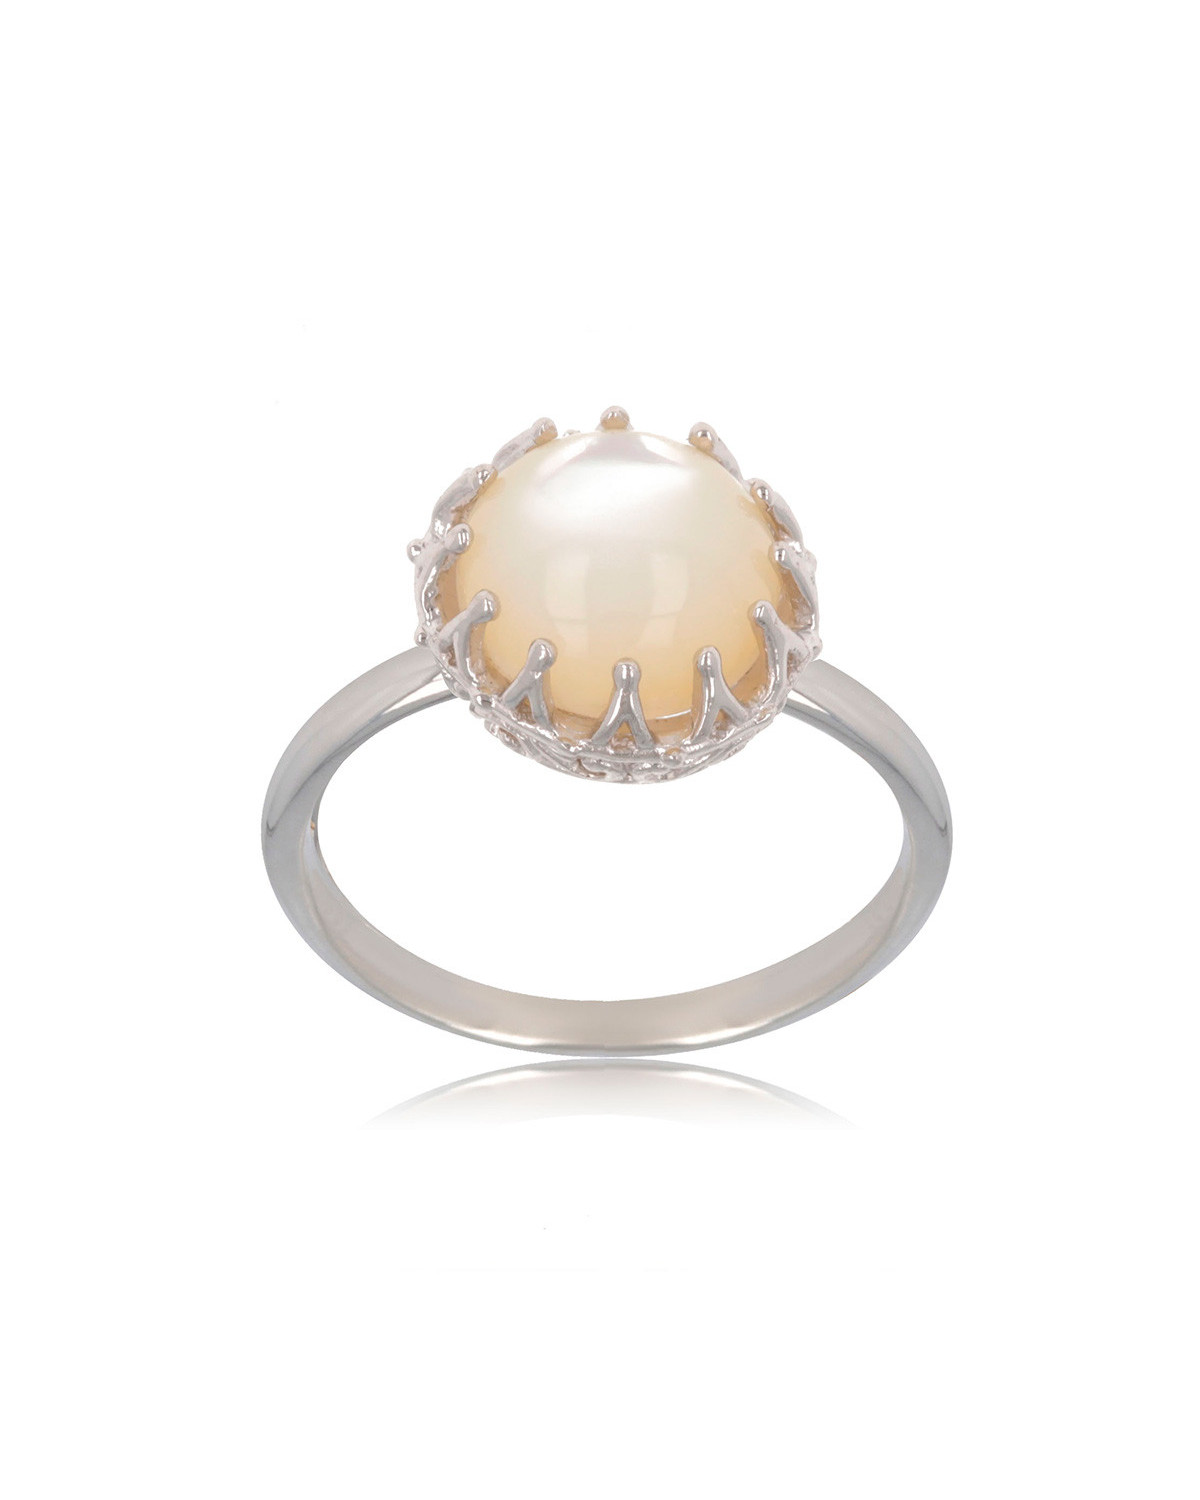 925 Sterling Silver White Mother-of-pearl Round Shape Ring